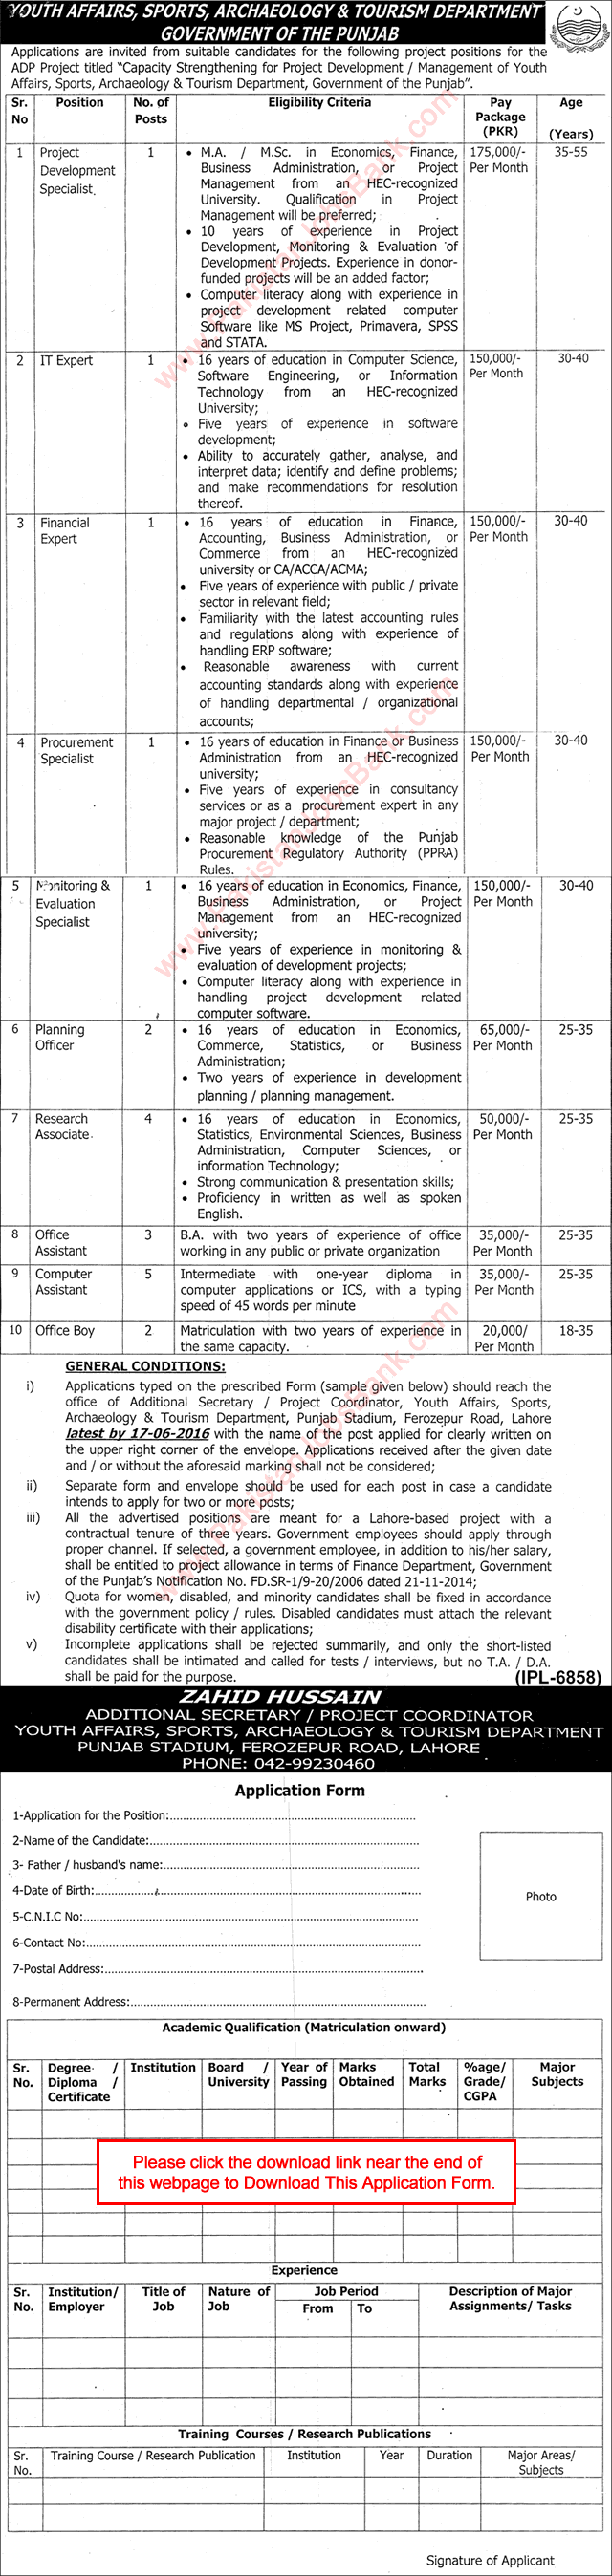 Youth Affairs, Sports, Archaeology and Tourism Department Punjab Jobs 2016 June Application Form Download Latest